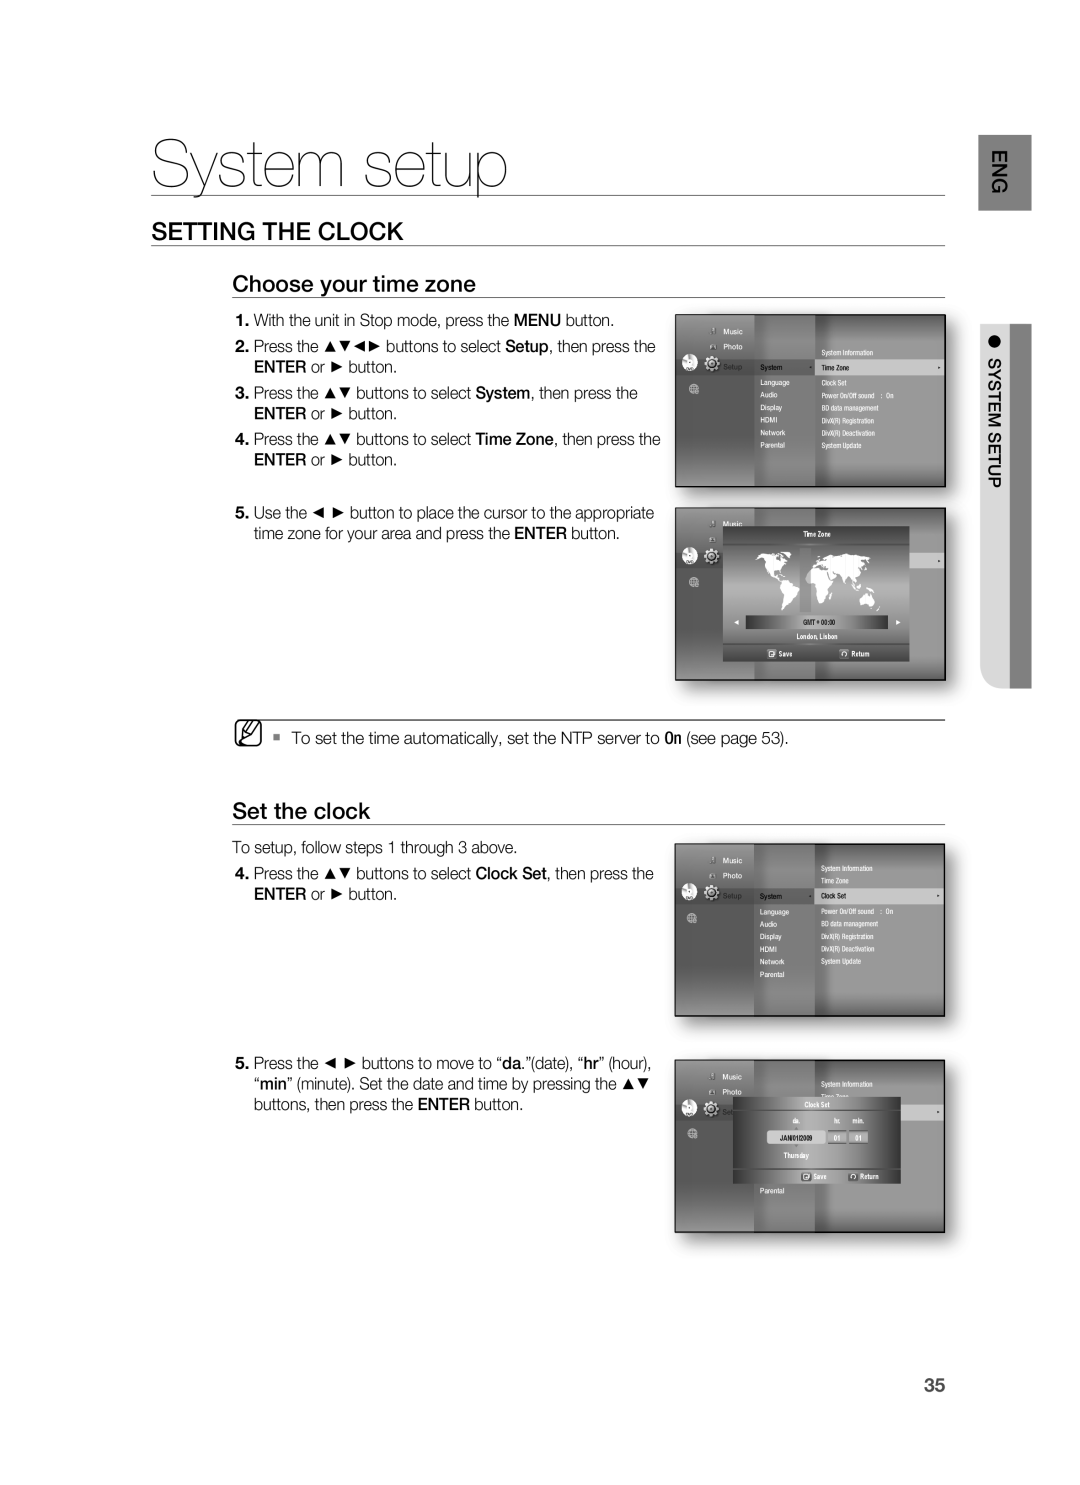 Samsung HT-BD8200 user manual System setup, Setting The Clock, Choose your time zone, Set the clock, ENTER or button 